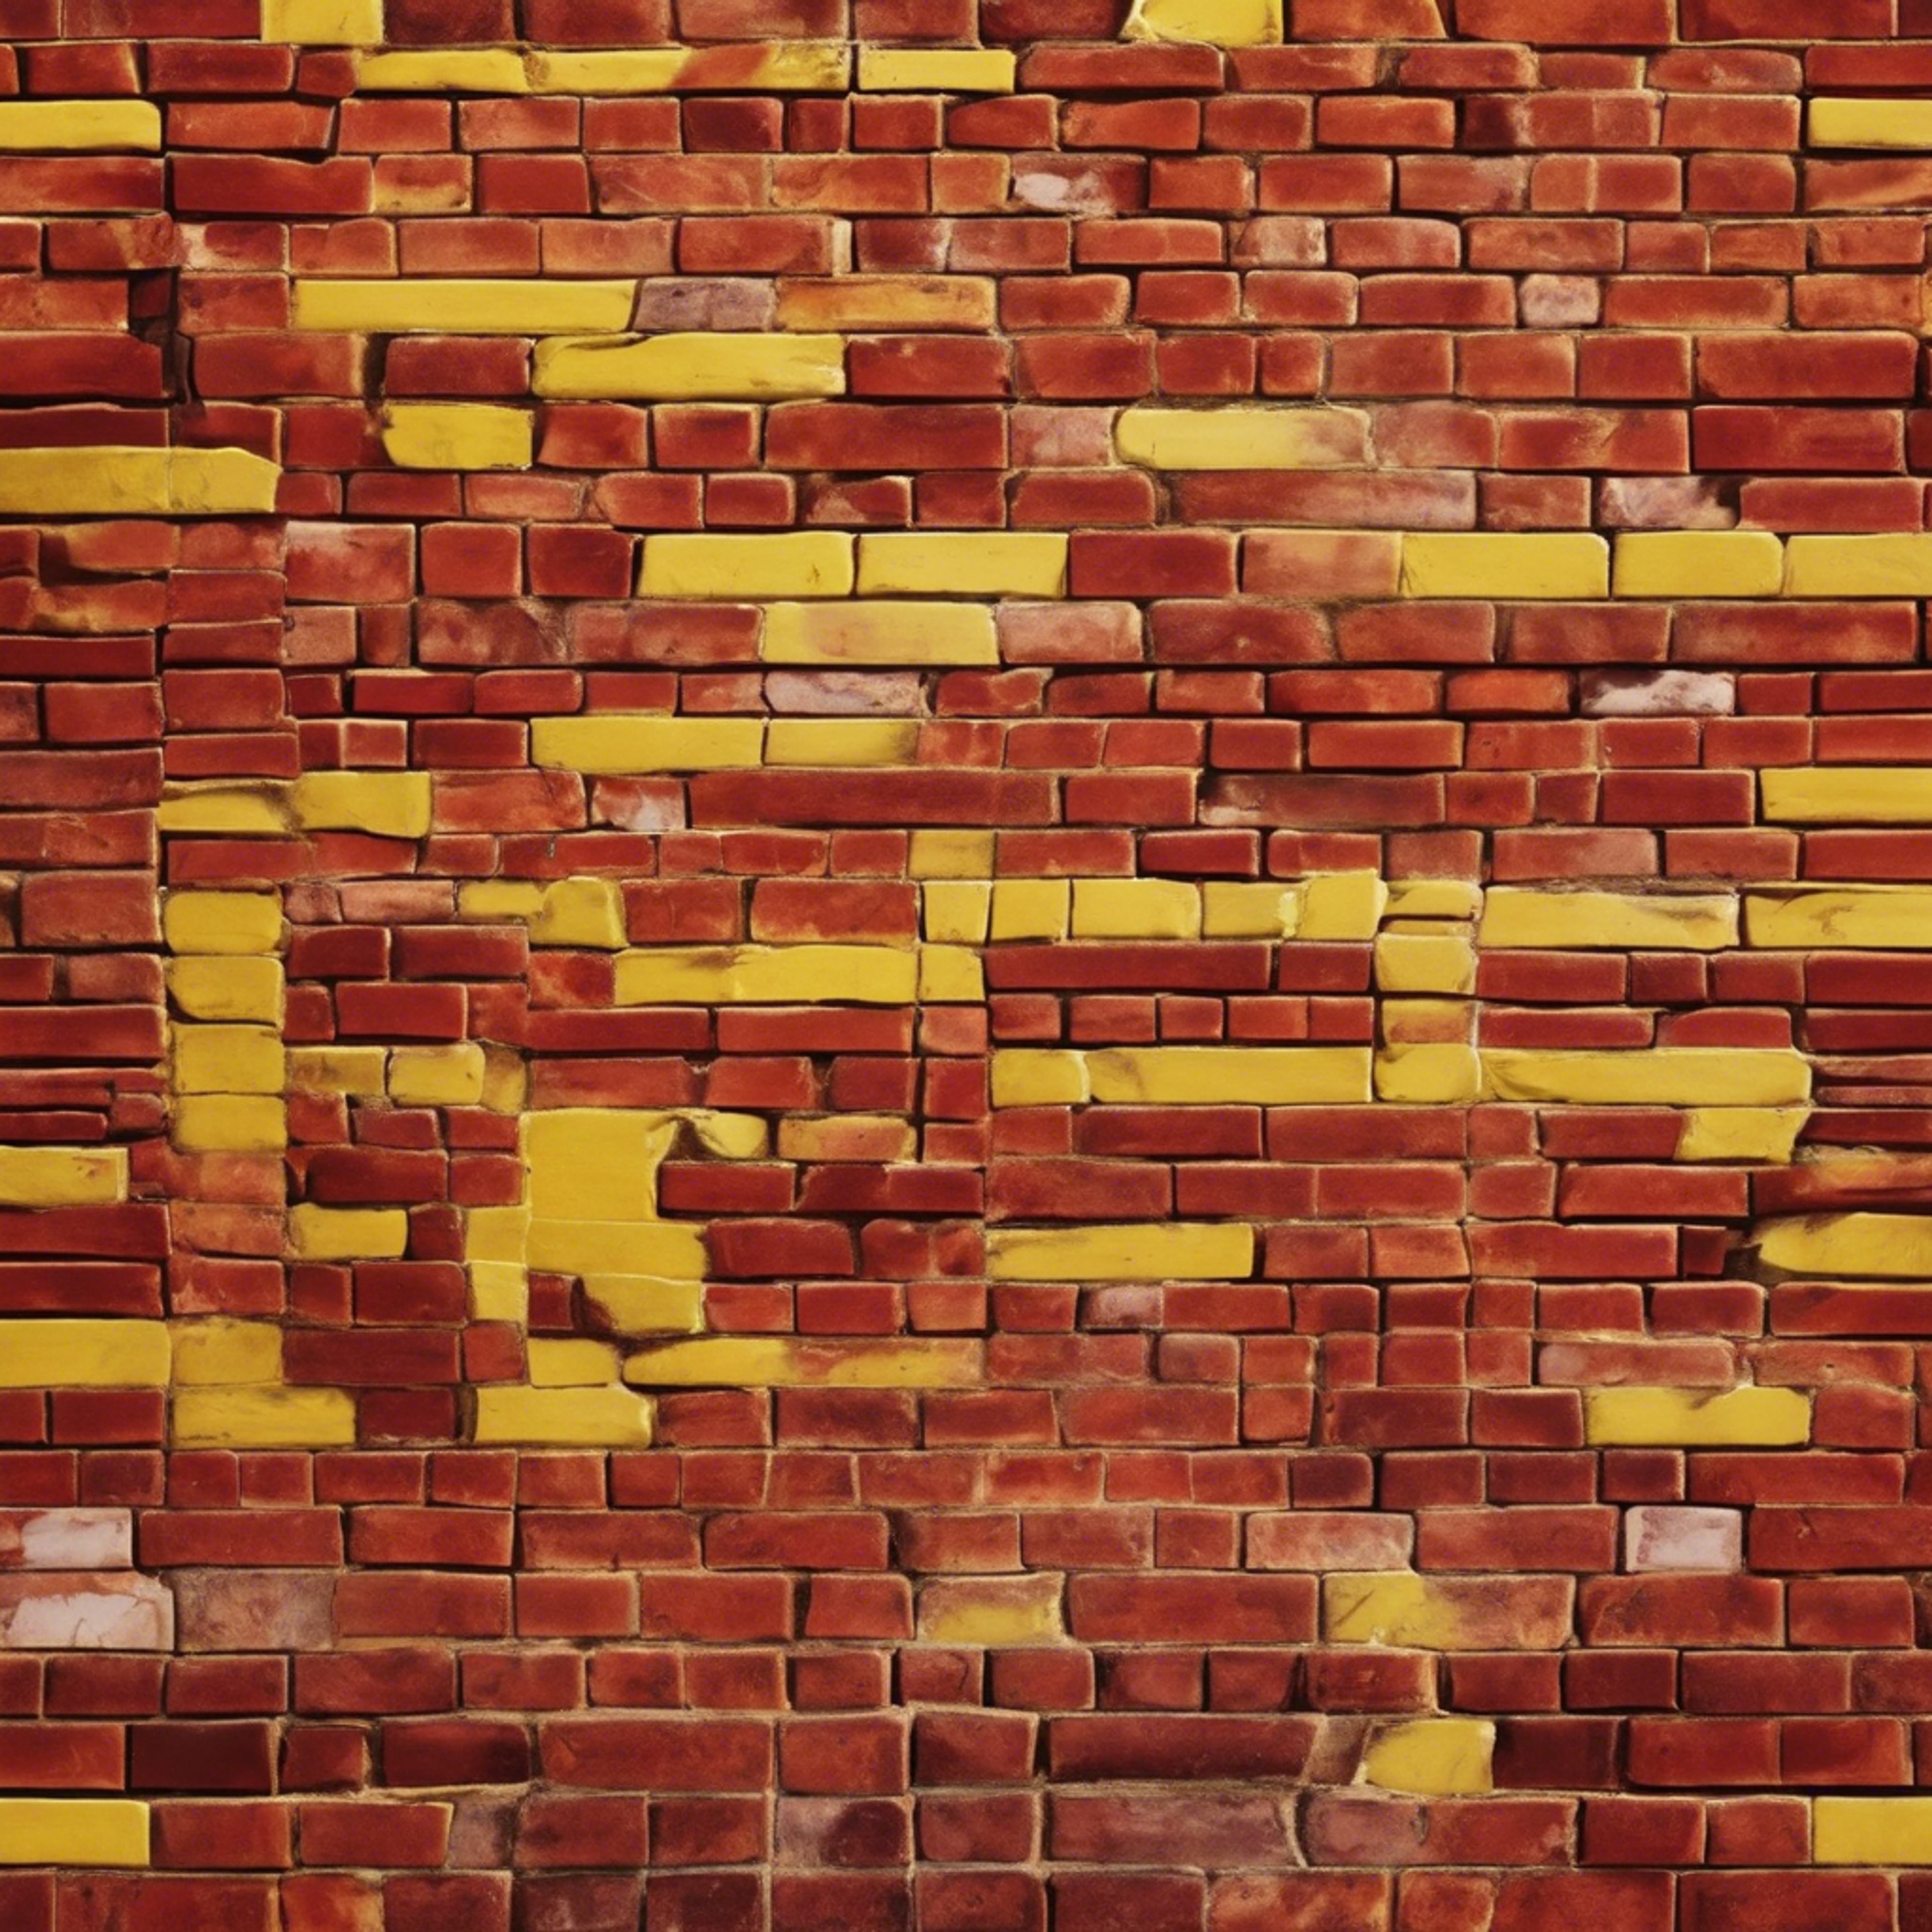 Red and yellow brick pattern seen through the illusion of a watery surface - the bricks appear slightly distorted yet colorful. 牆紙[6ac5a5324f9a41fcbc3c]